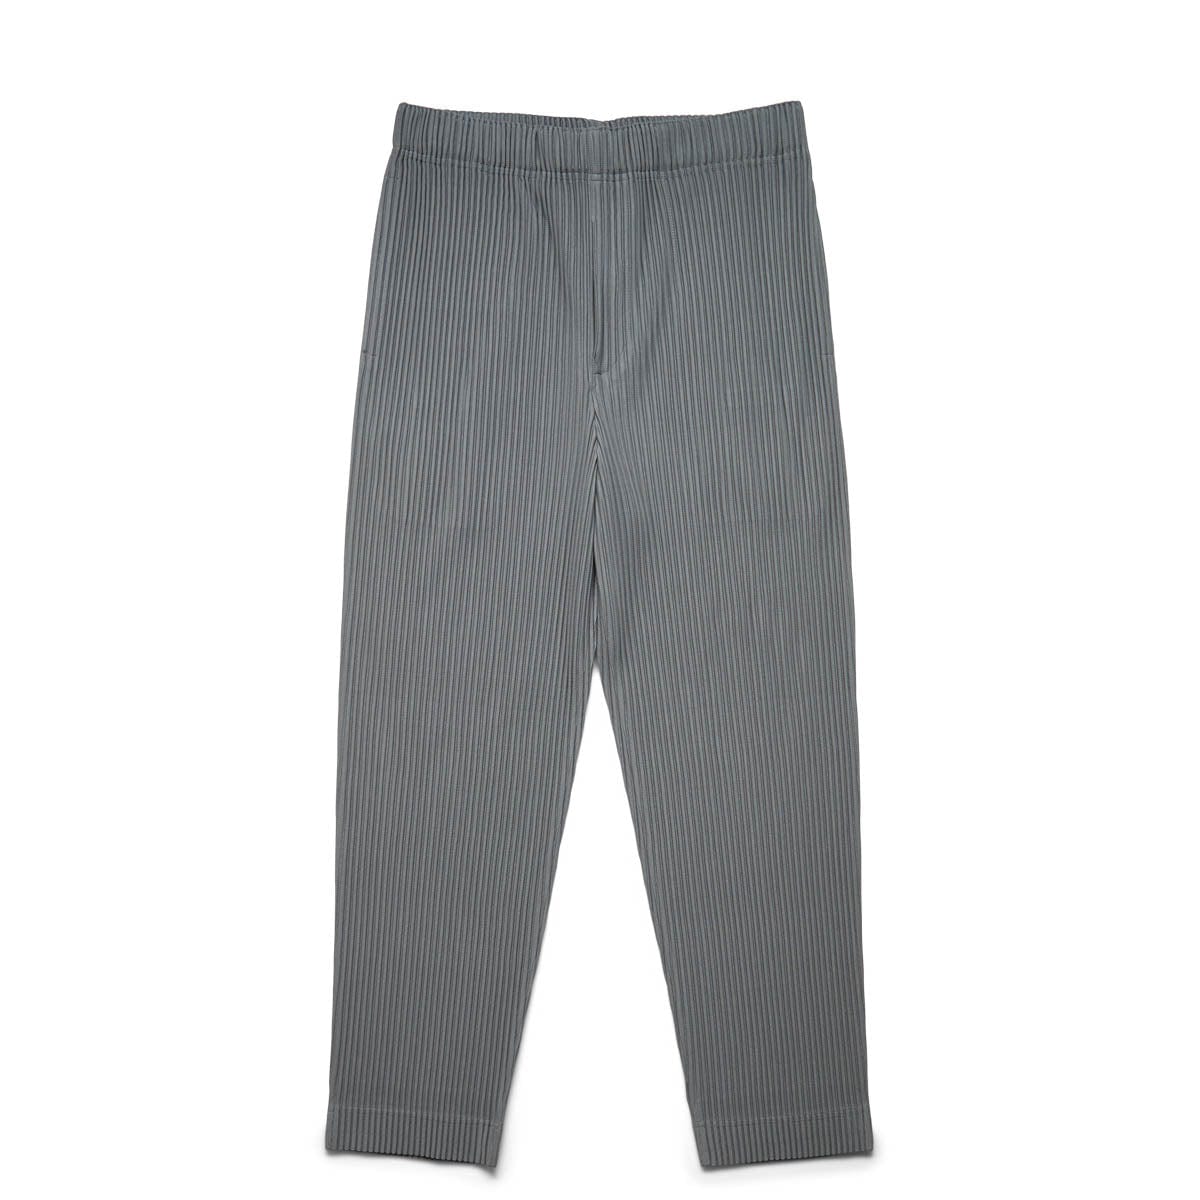 Homme Plissé Issey Miyake Bottoms PLEATED TROUSERS